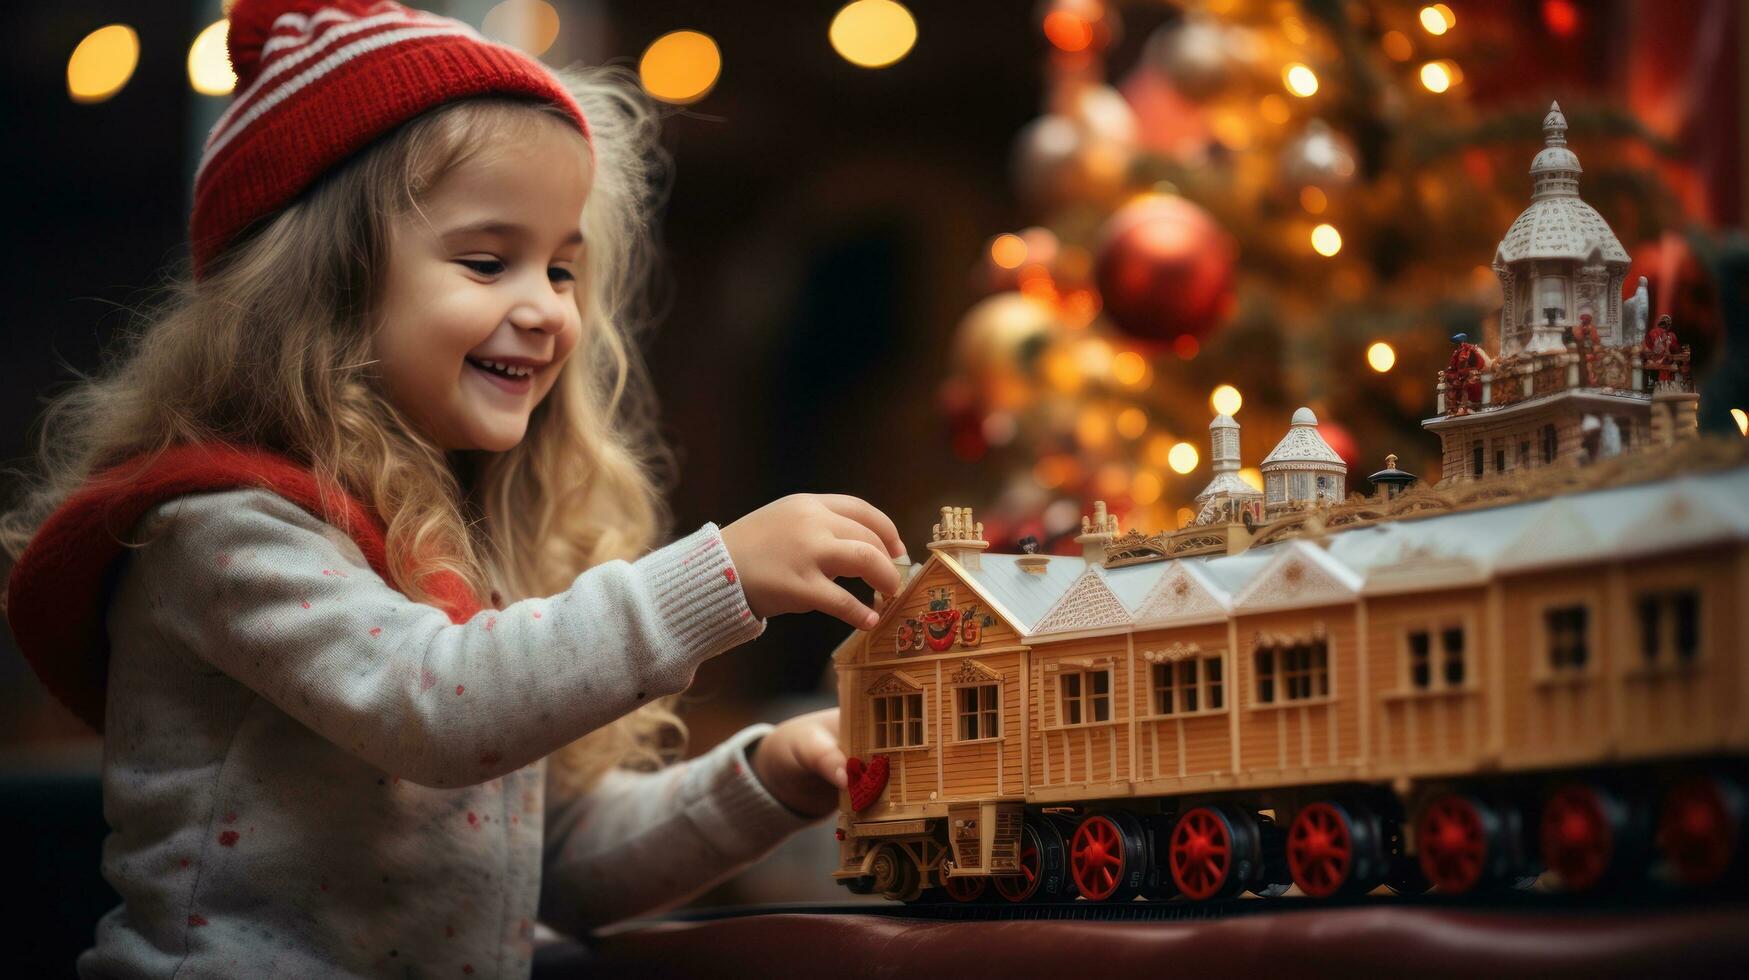 child plays with toy train sitteng ubder christma tree photo